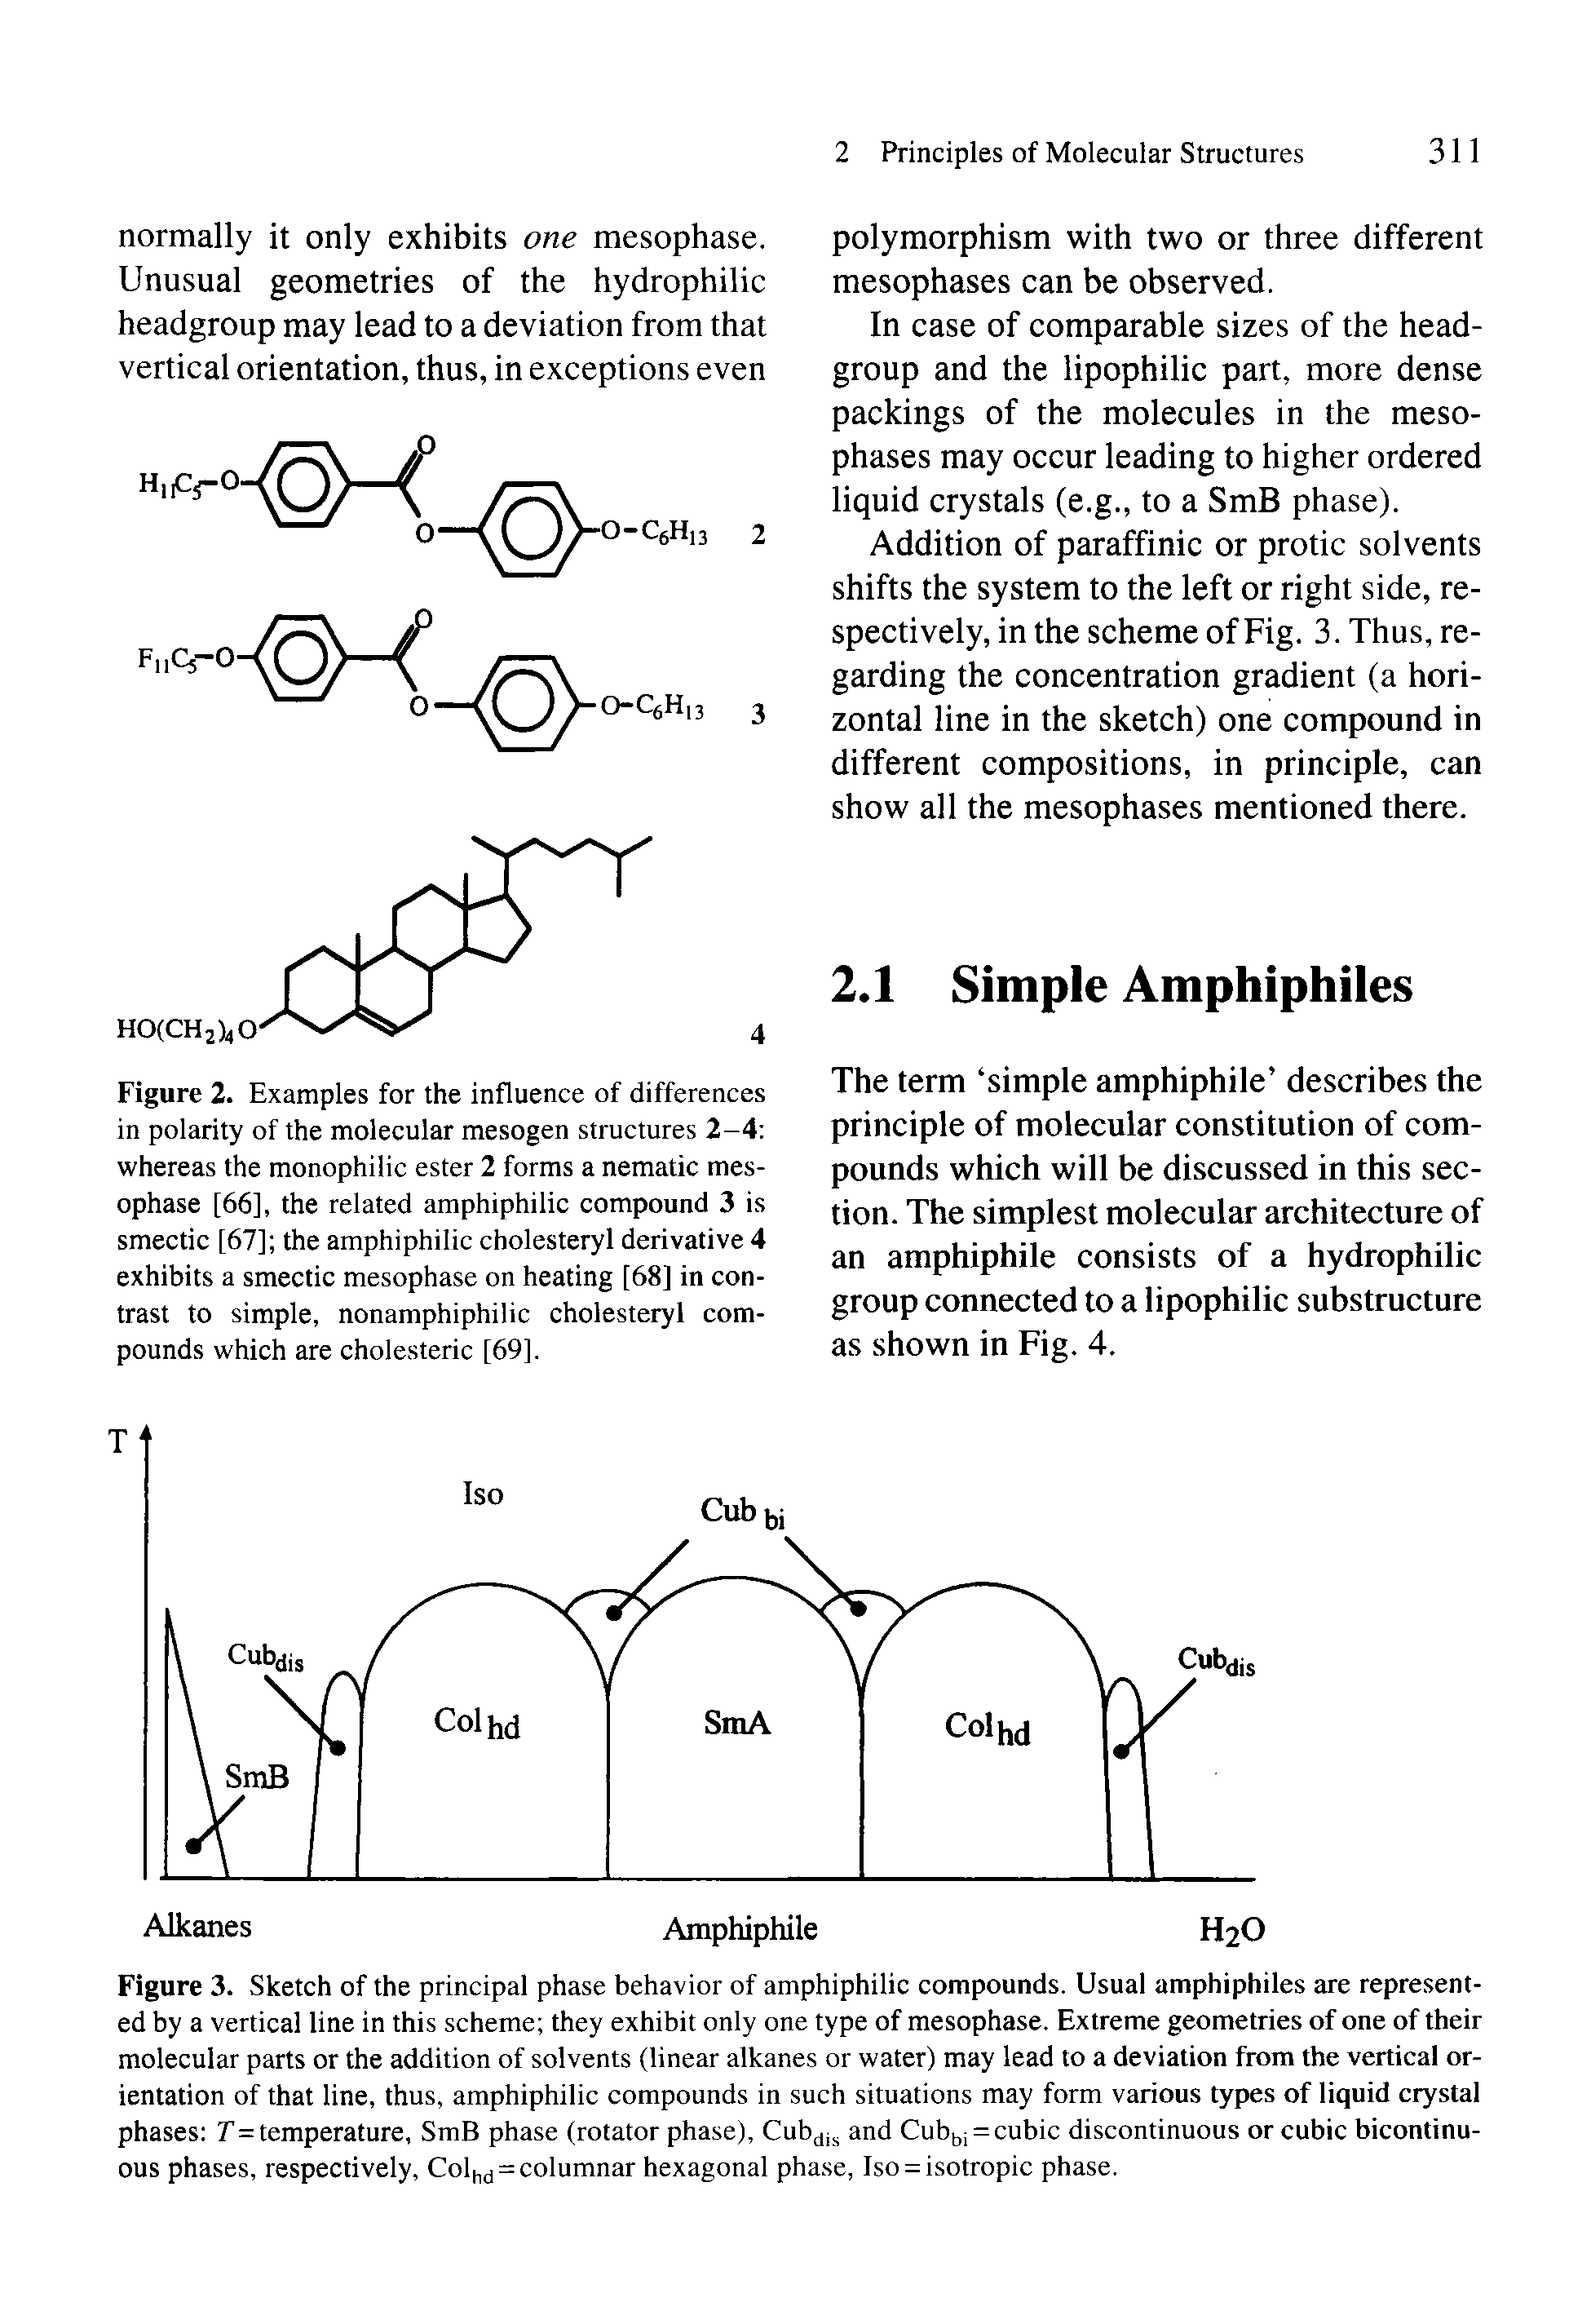 Figure 3. Sketch of the principal phase behavior of amphiphilic compounds. Usual amphiphiles are represented by a vertical line in this scheme they exhibit only one type of mesophase. Extreme geometries of one of their molecular parts or the addition of solvents (linear alkanes or water) may lead to a deviation from the vertical orientation of that line, thus, amphiphilic compounds in such situations may form various types of liquid crystal phases T = temperature, SmB phase (rotator phase), Cubjn and Cub(,i = cubic discontinuous or cubic bicontinu-ous phases, respectively, Col, i = columnar hexagonal phase, Iso = isotropic phase.